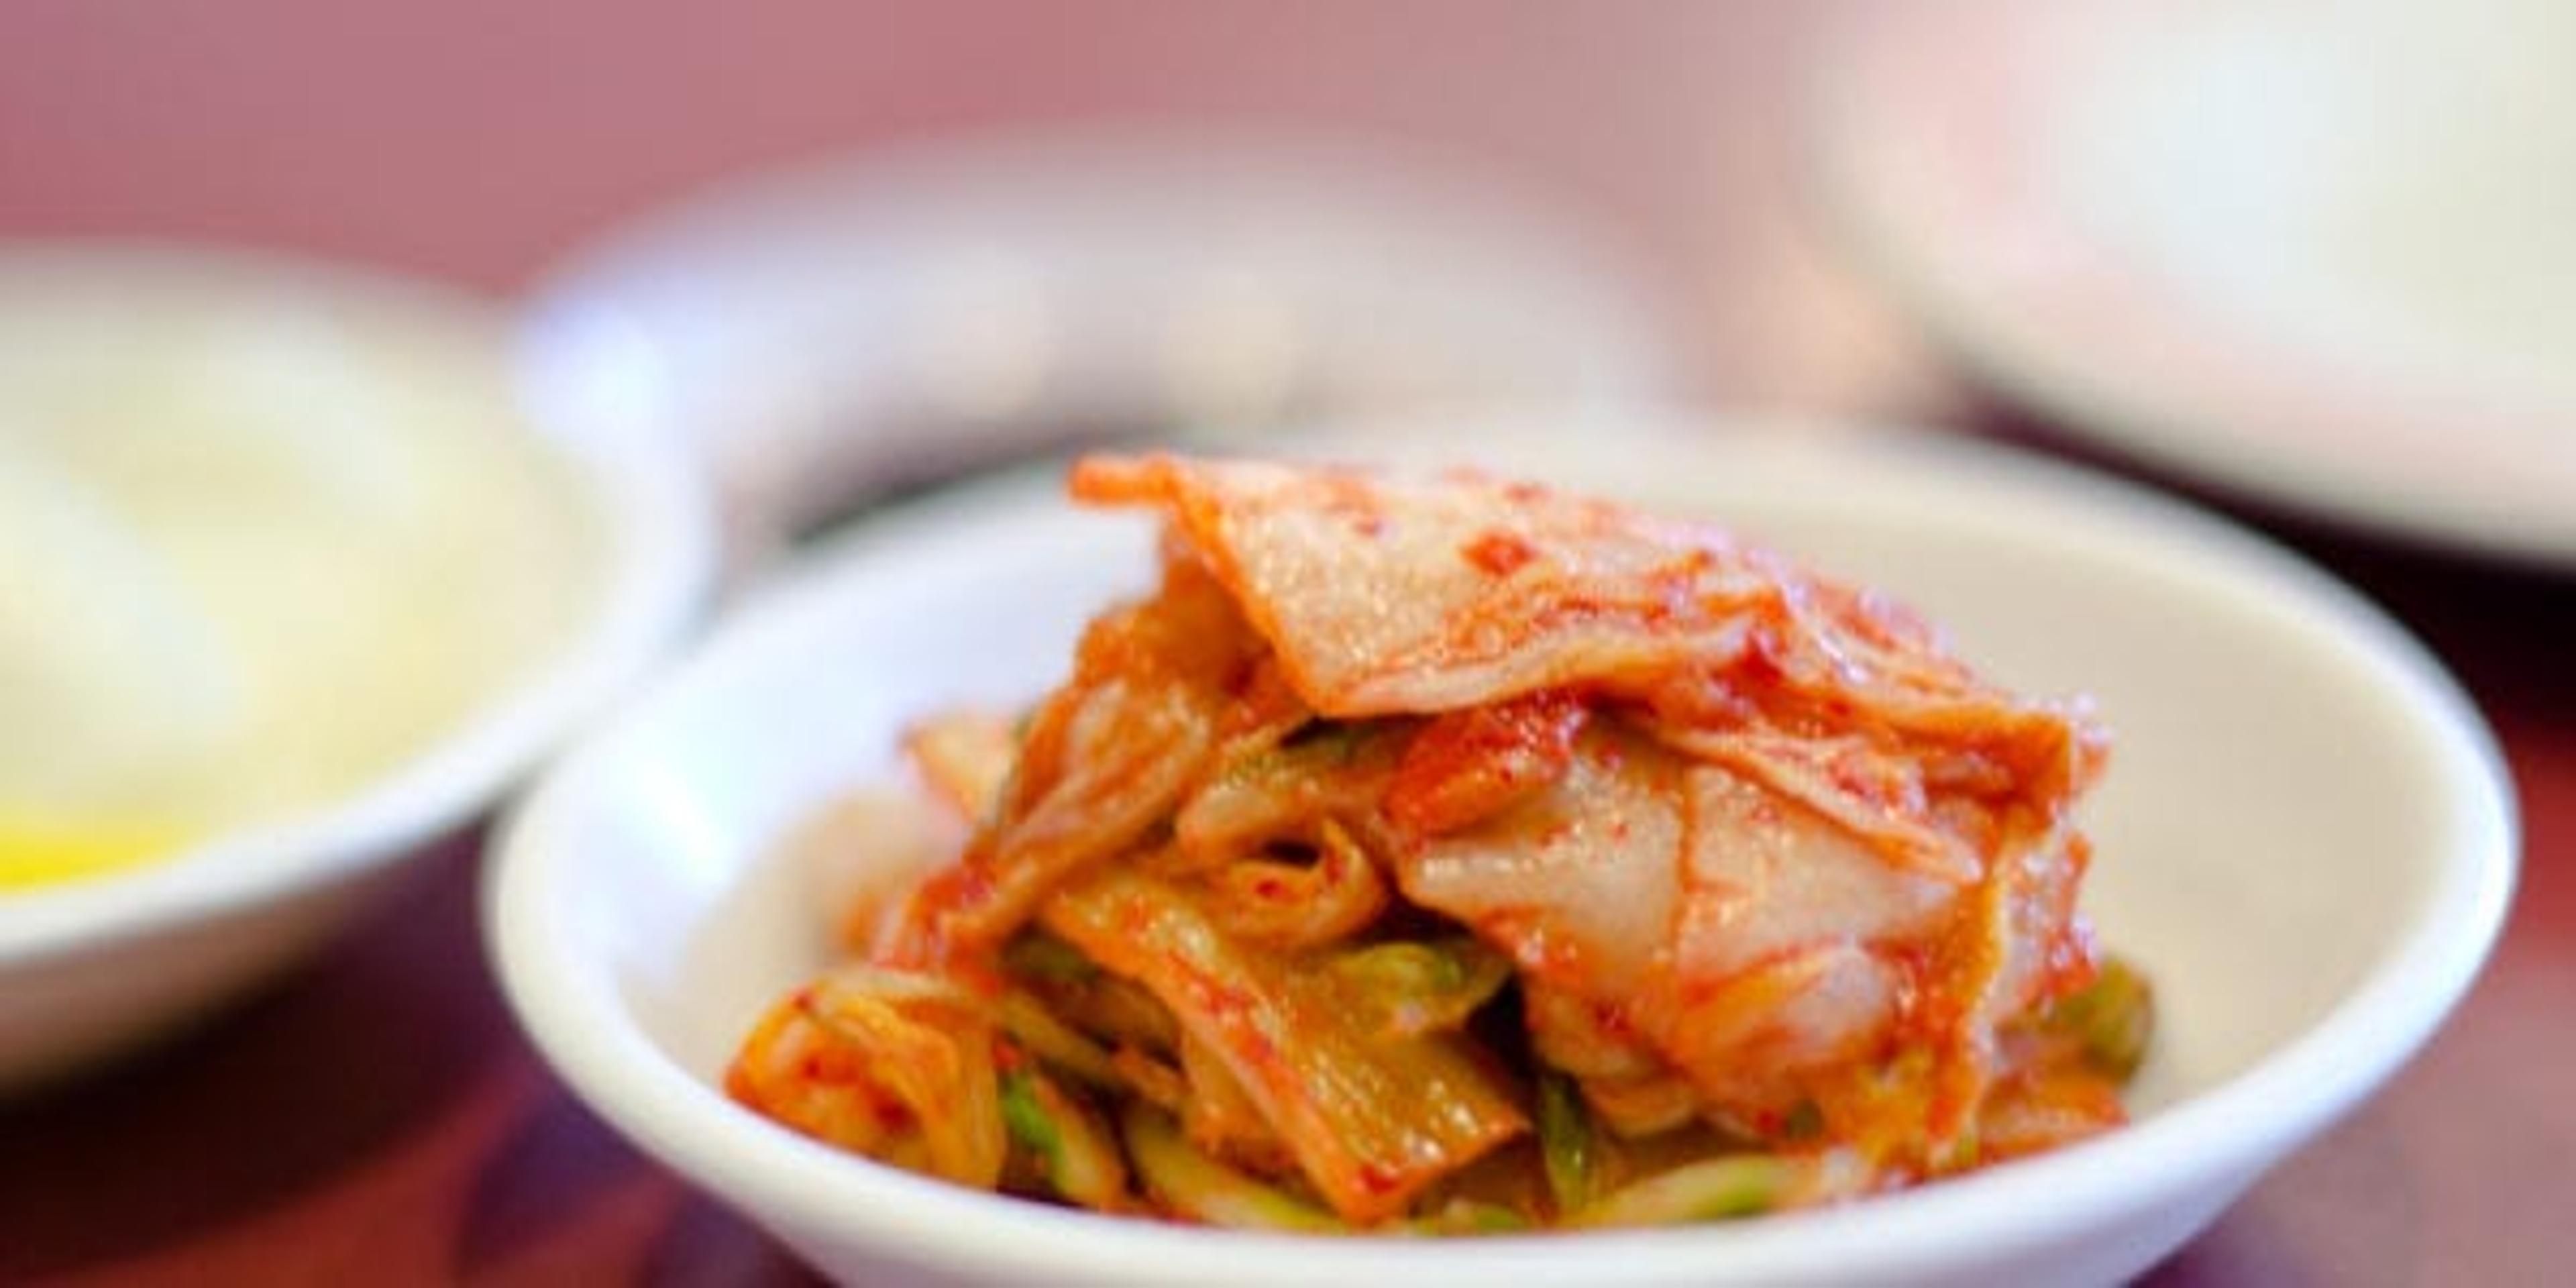 benefits of fermented foods